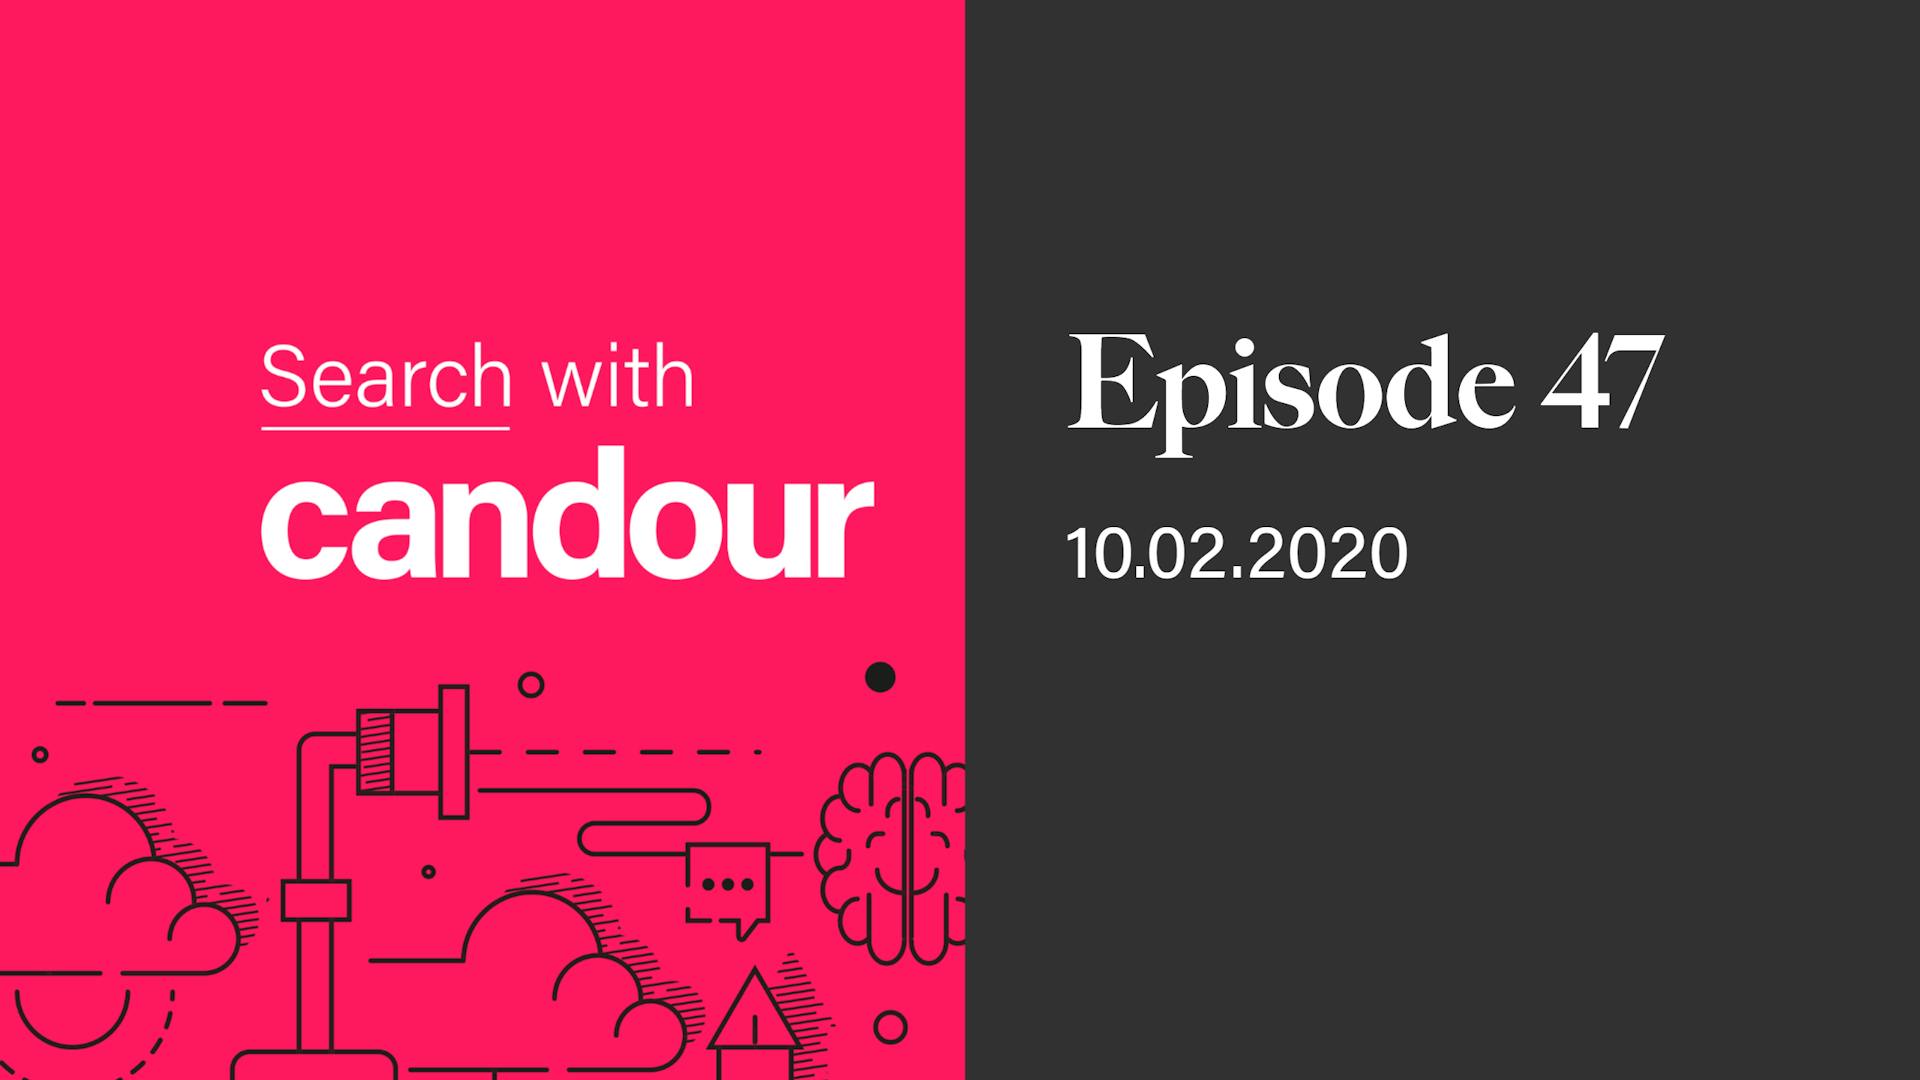 Episode 47 - Search with Candour